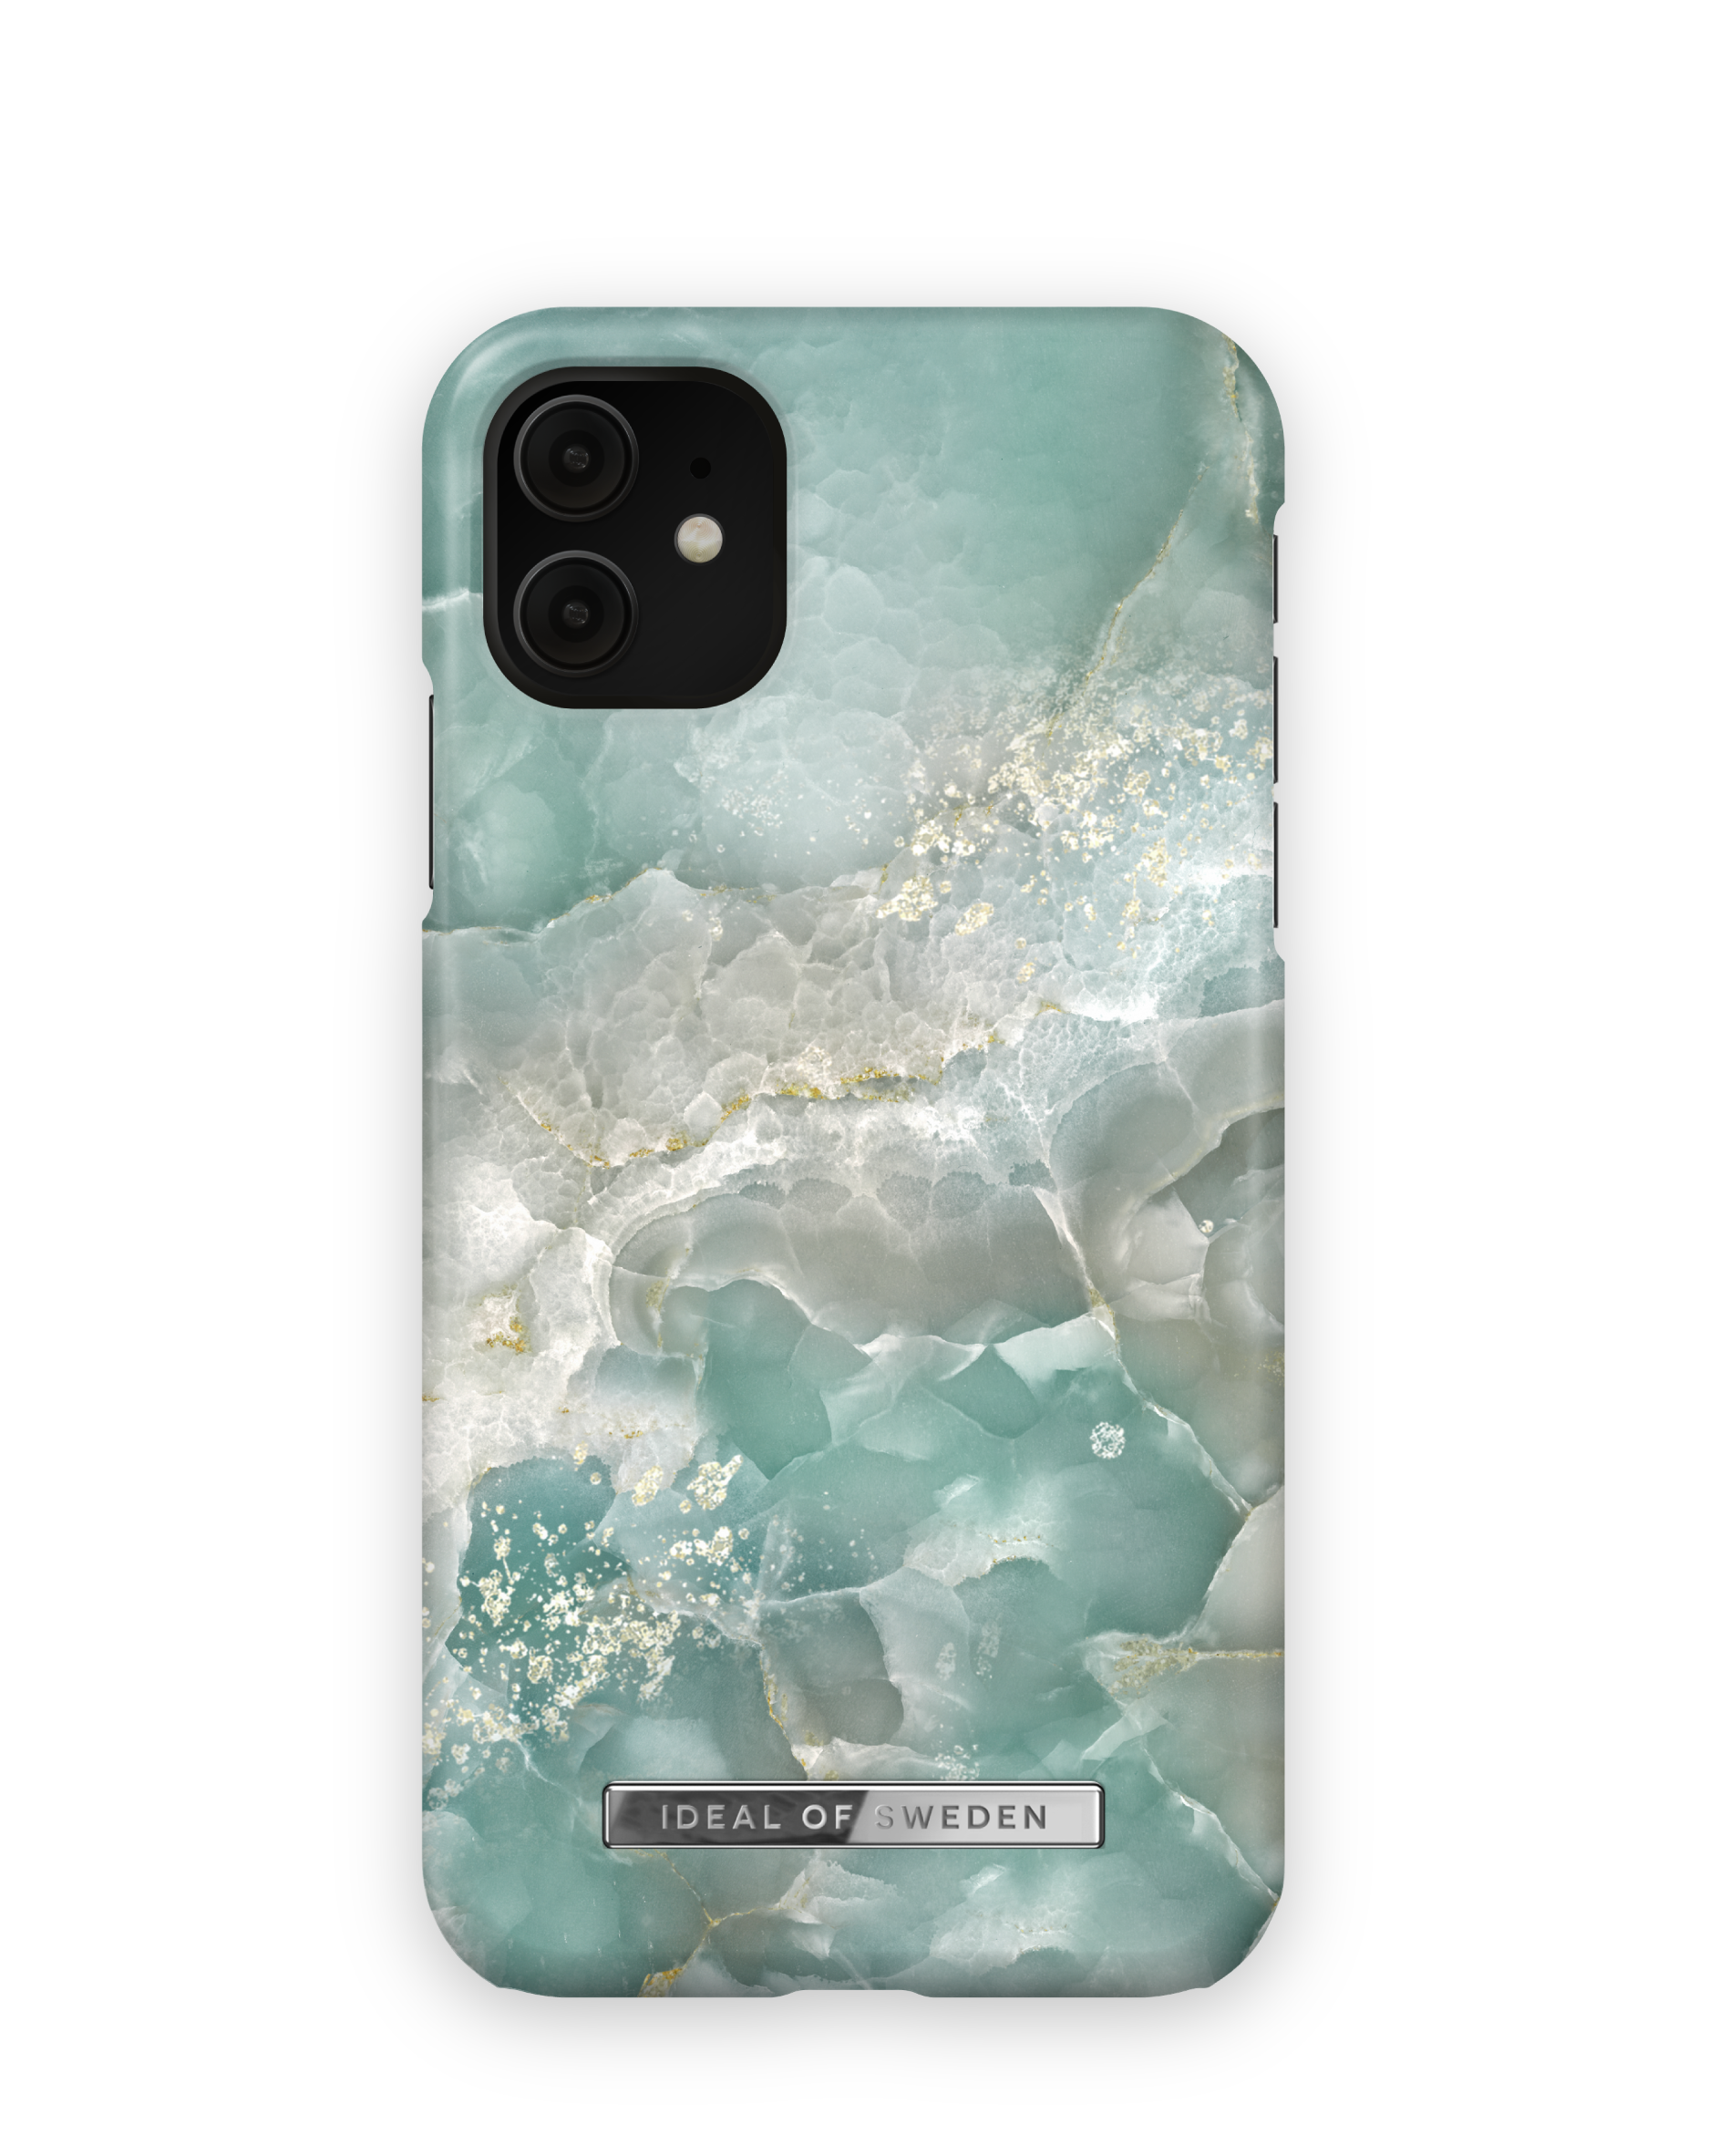 IDEAL OF Apple, Marble iPhone Backcover, / XR, Azura SWEDEN iPhone 11 IDFCSS22-I1961-391